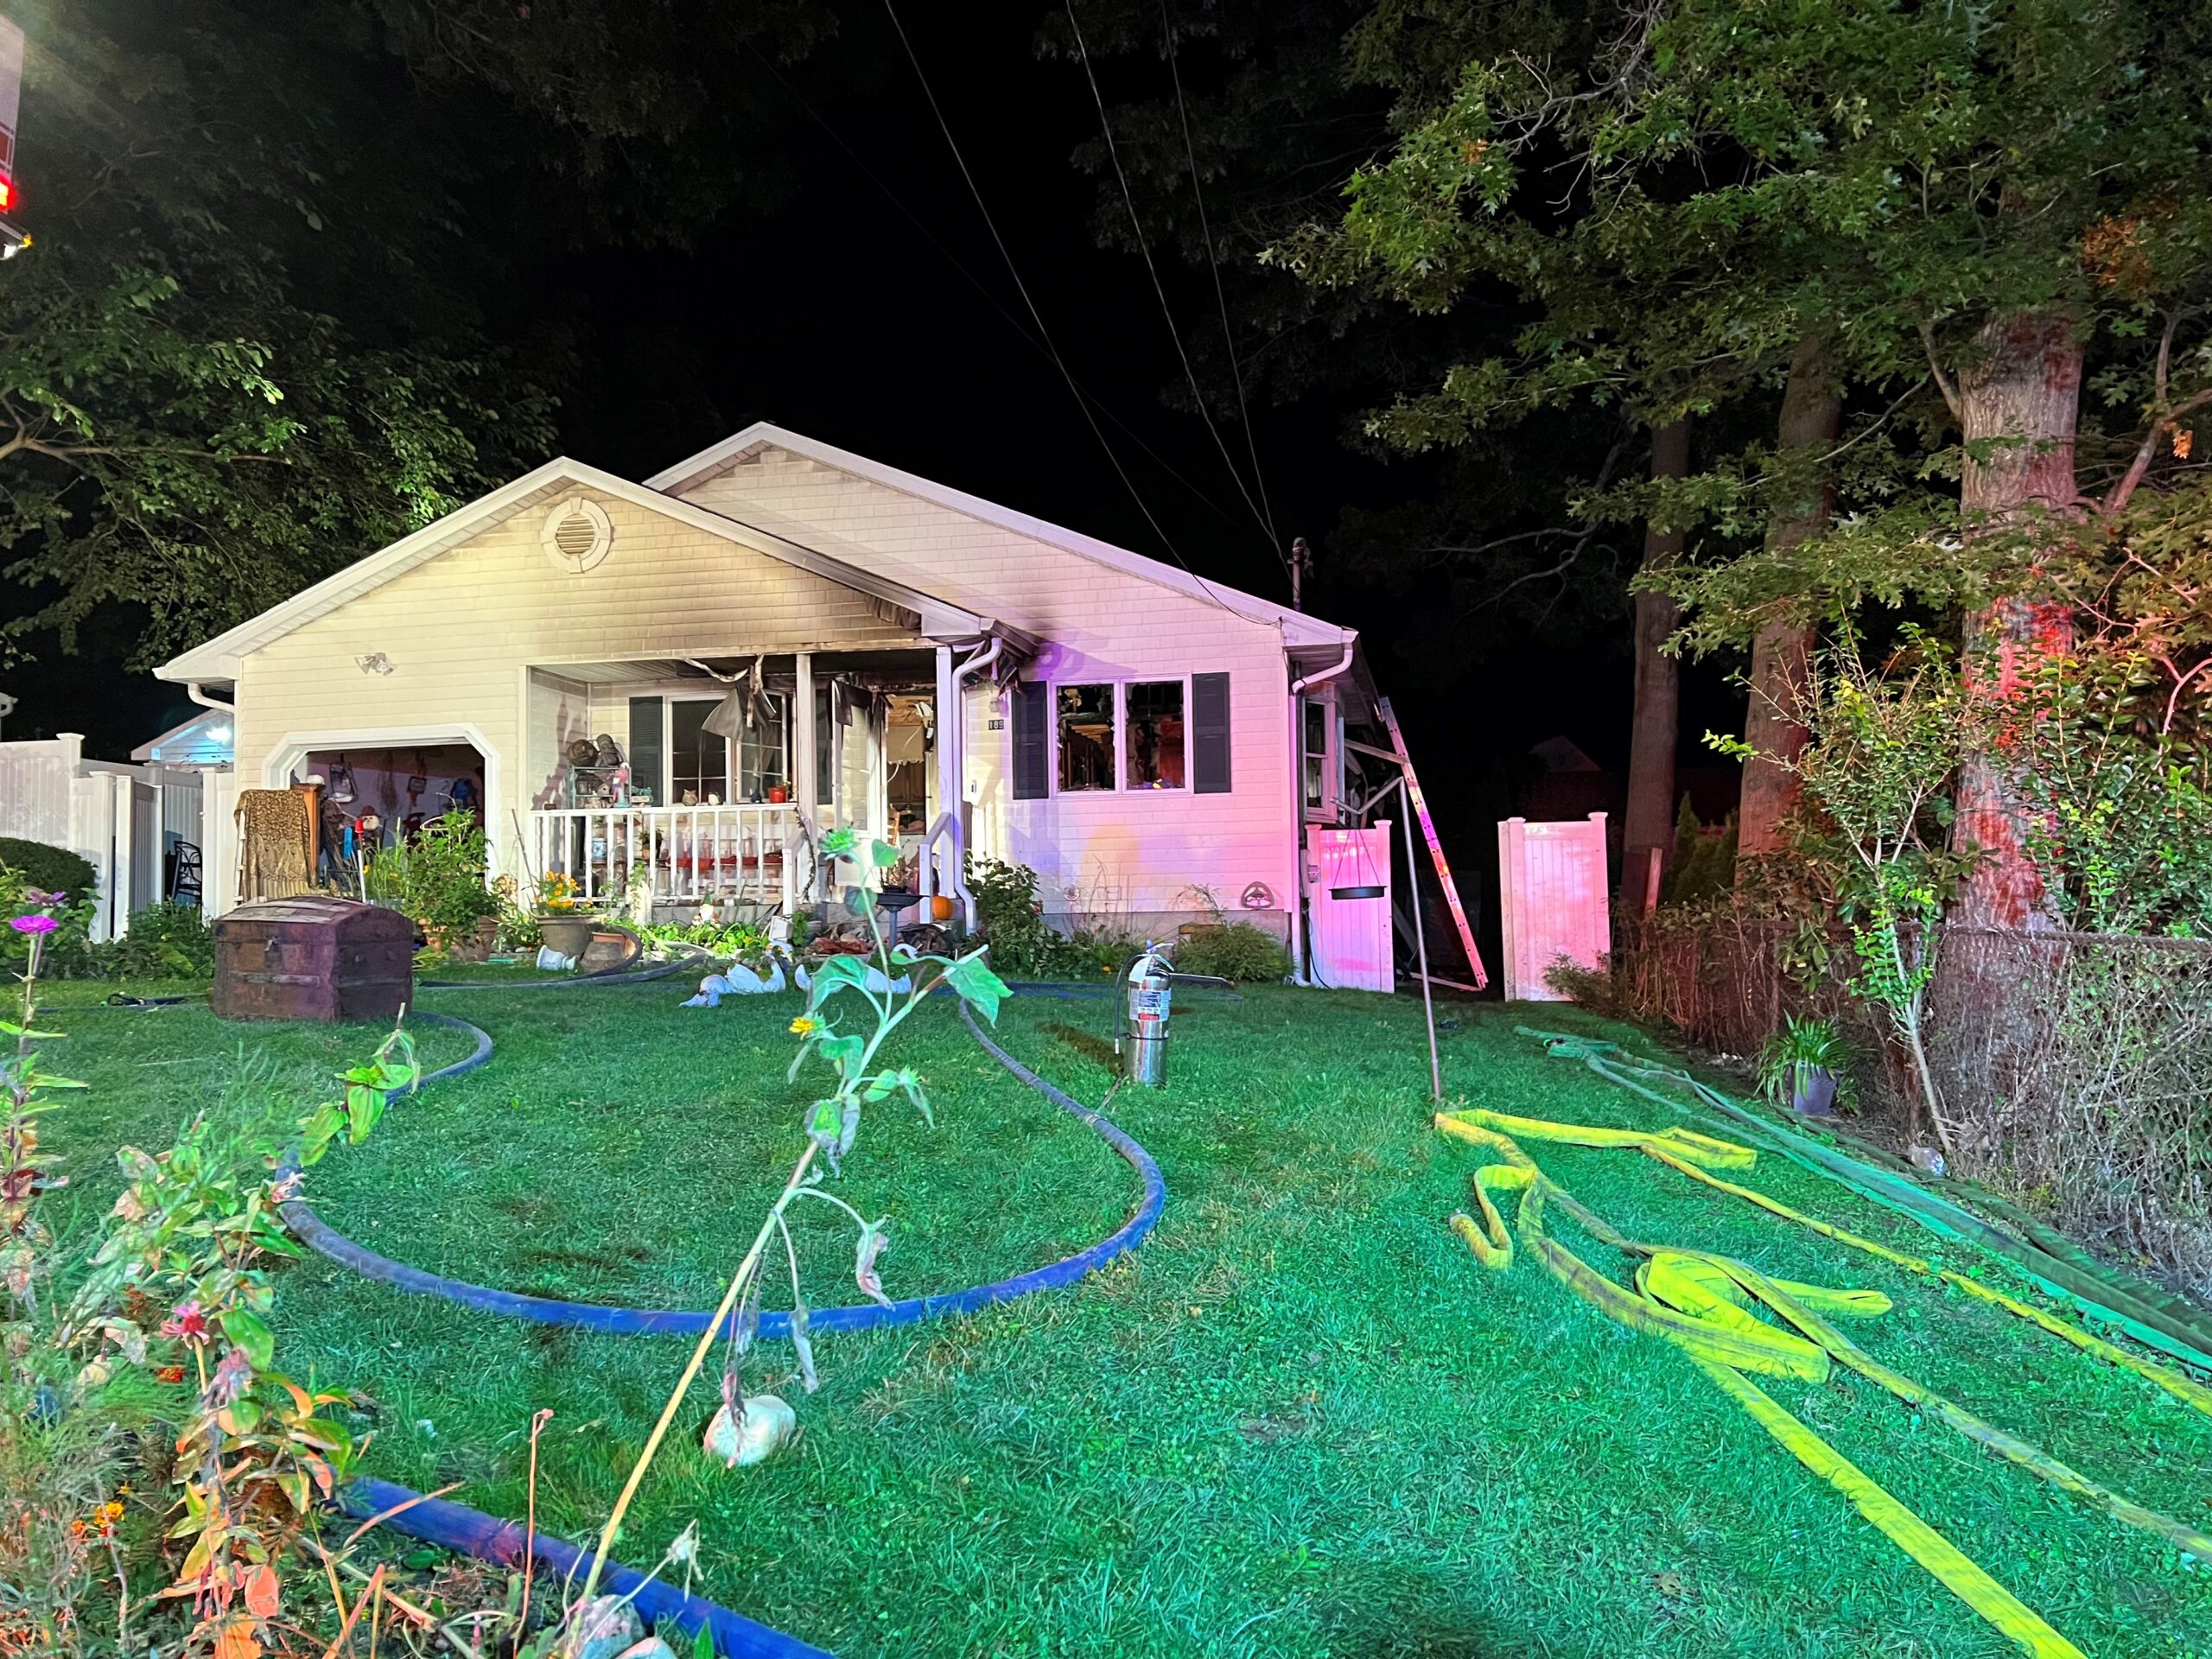 Holtsville FD Responds as Mutual Aid to Farmingville